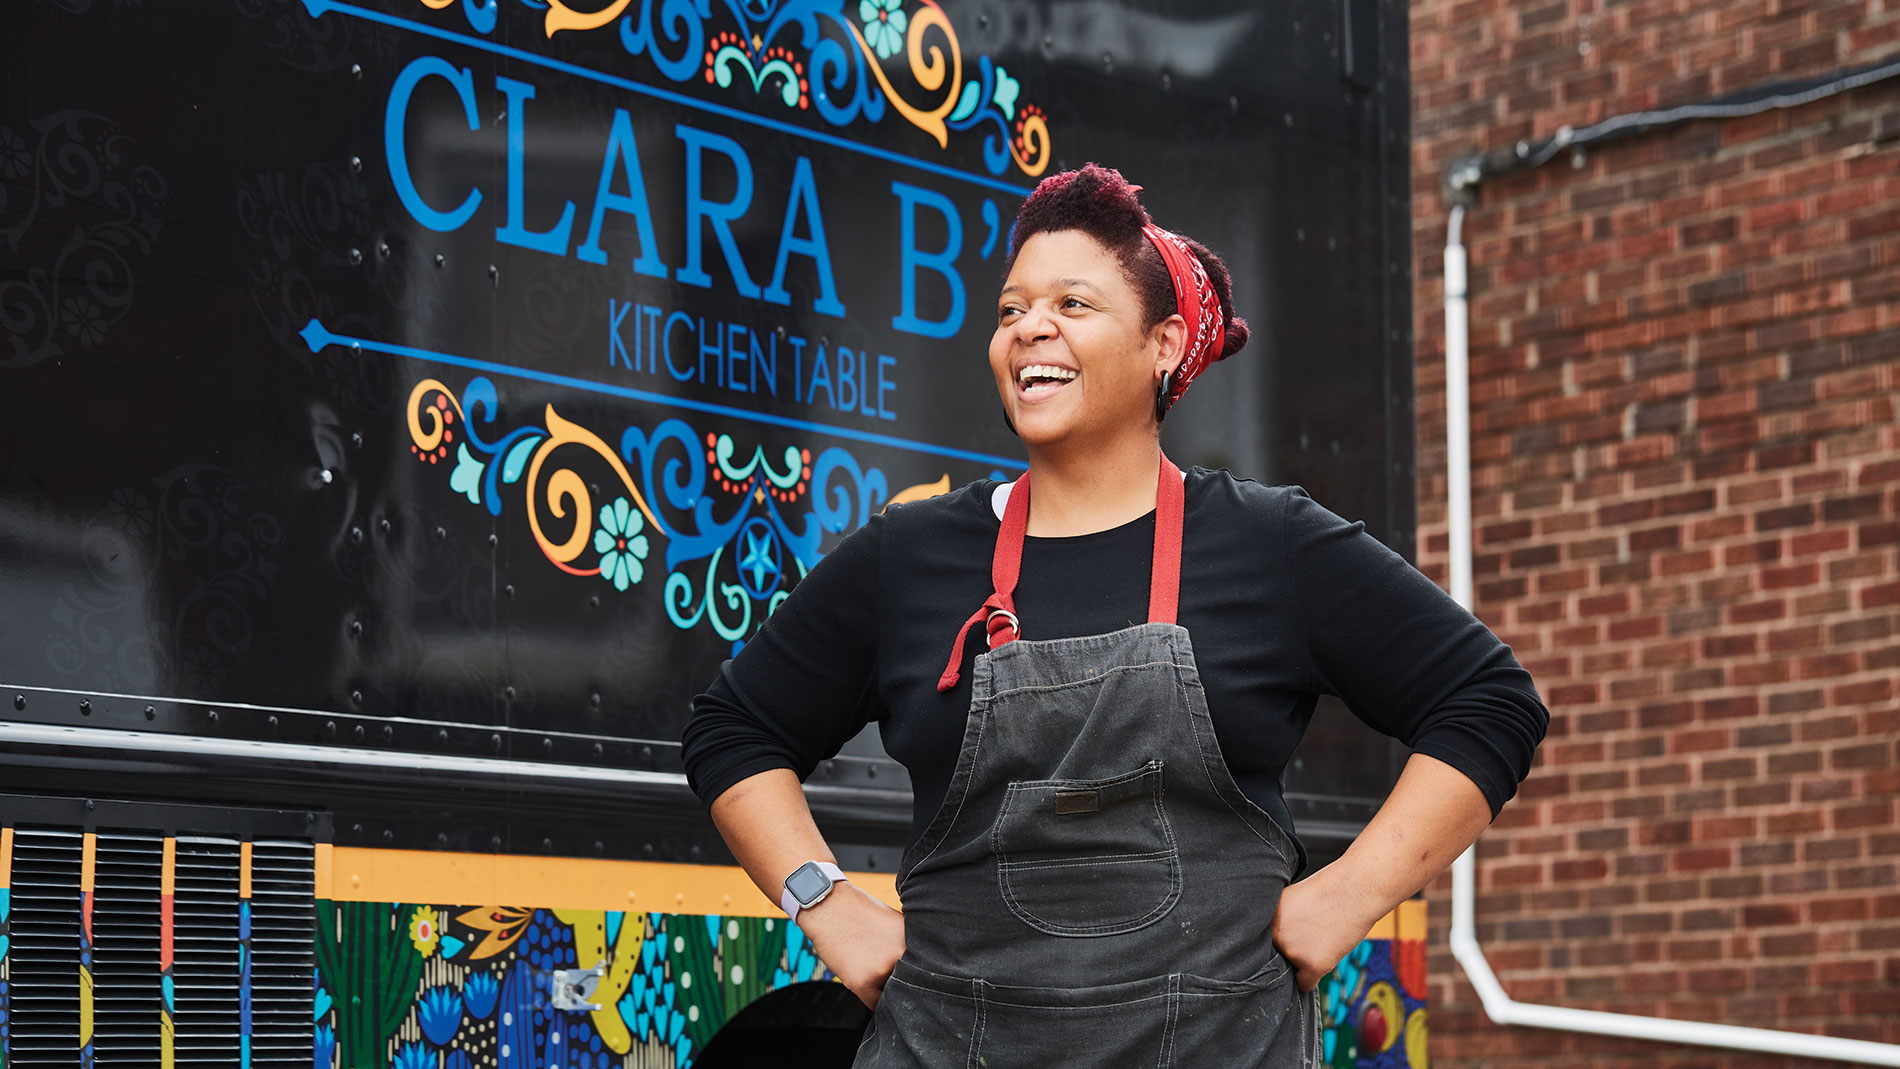 jodie ferguson, chef and owner of clara b's kitchen table